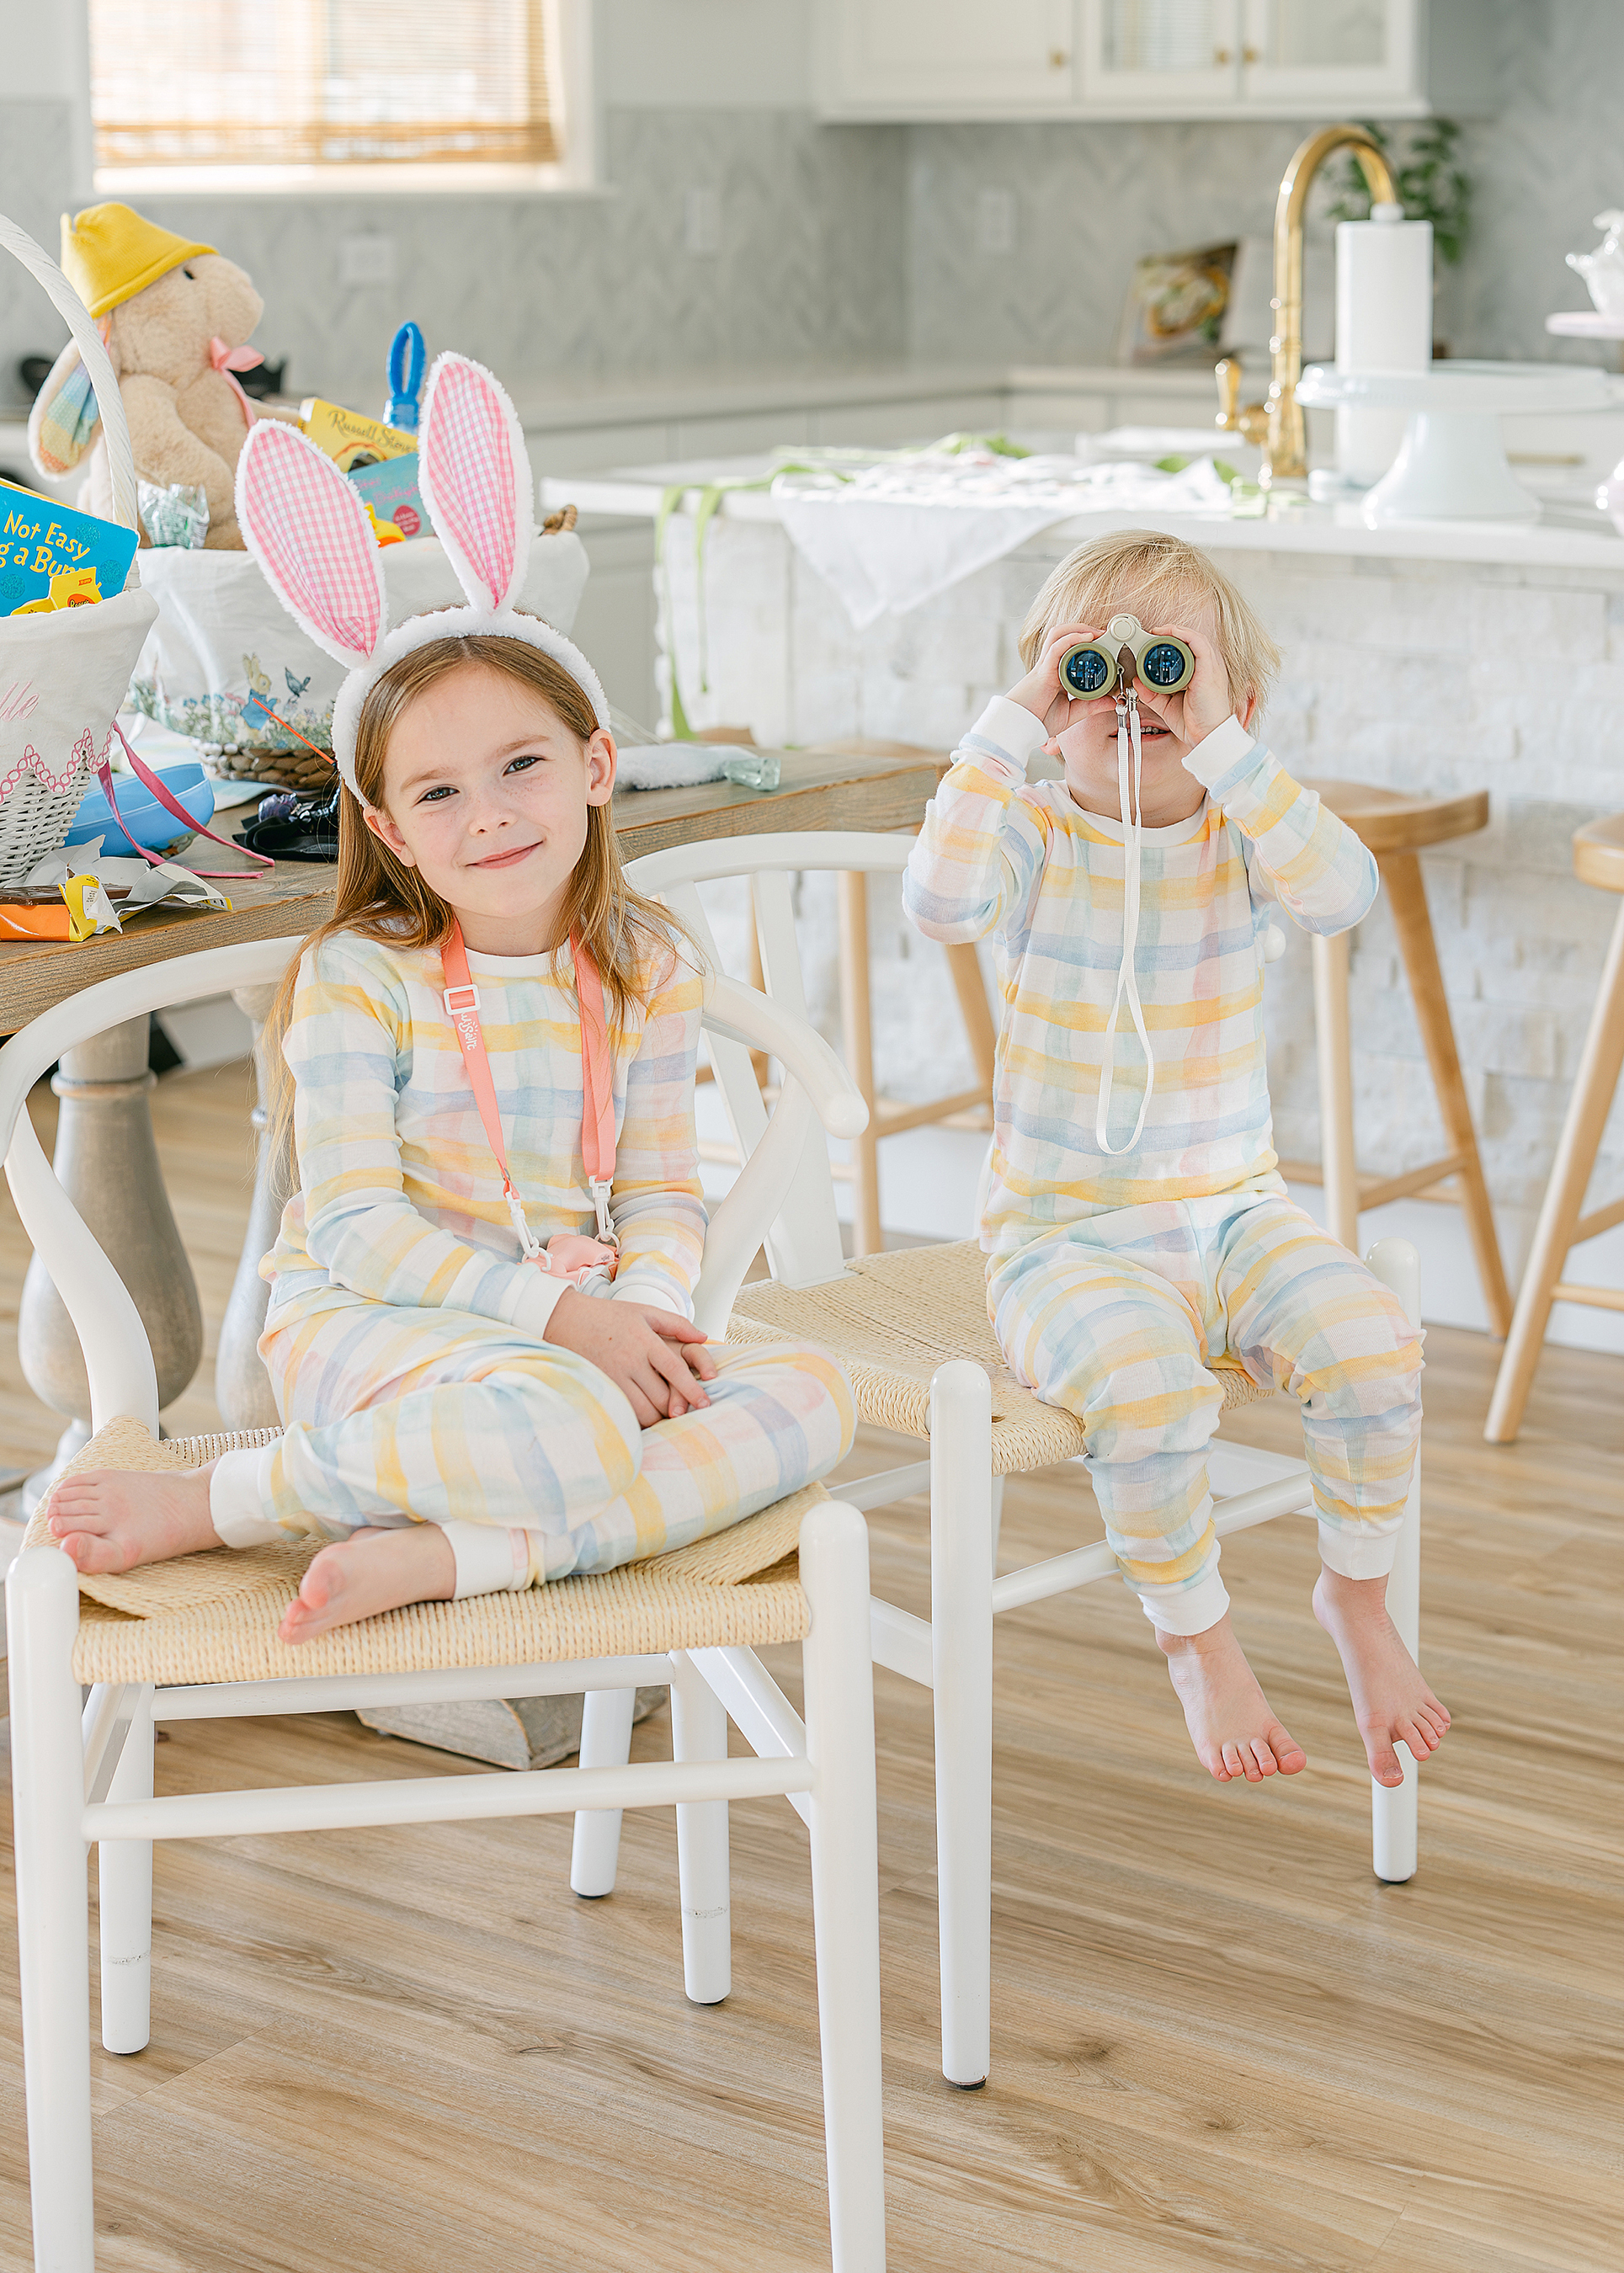 Two little children sit together on Easter wearing pastel pajamas in their kitchen.